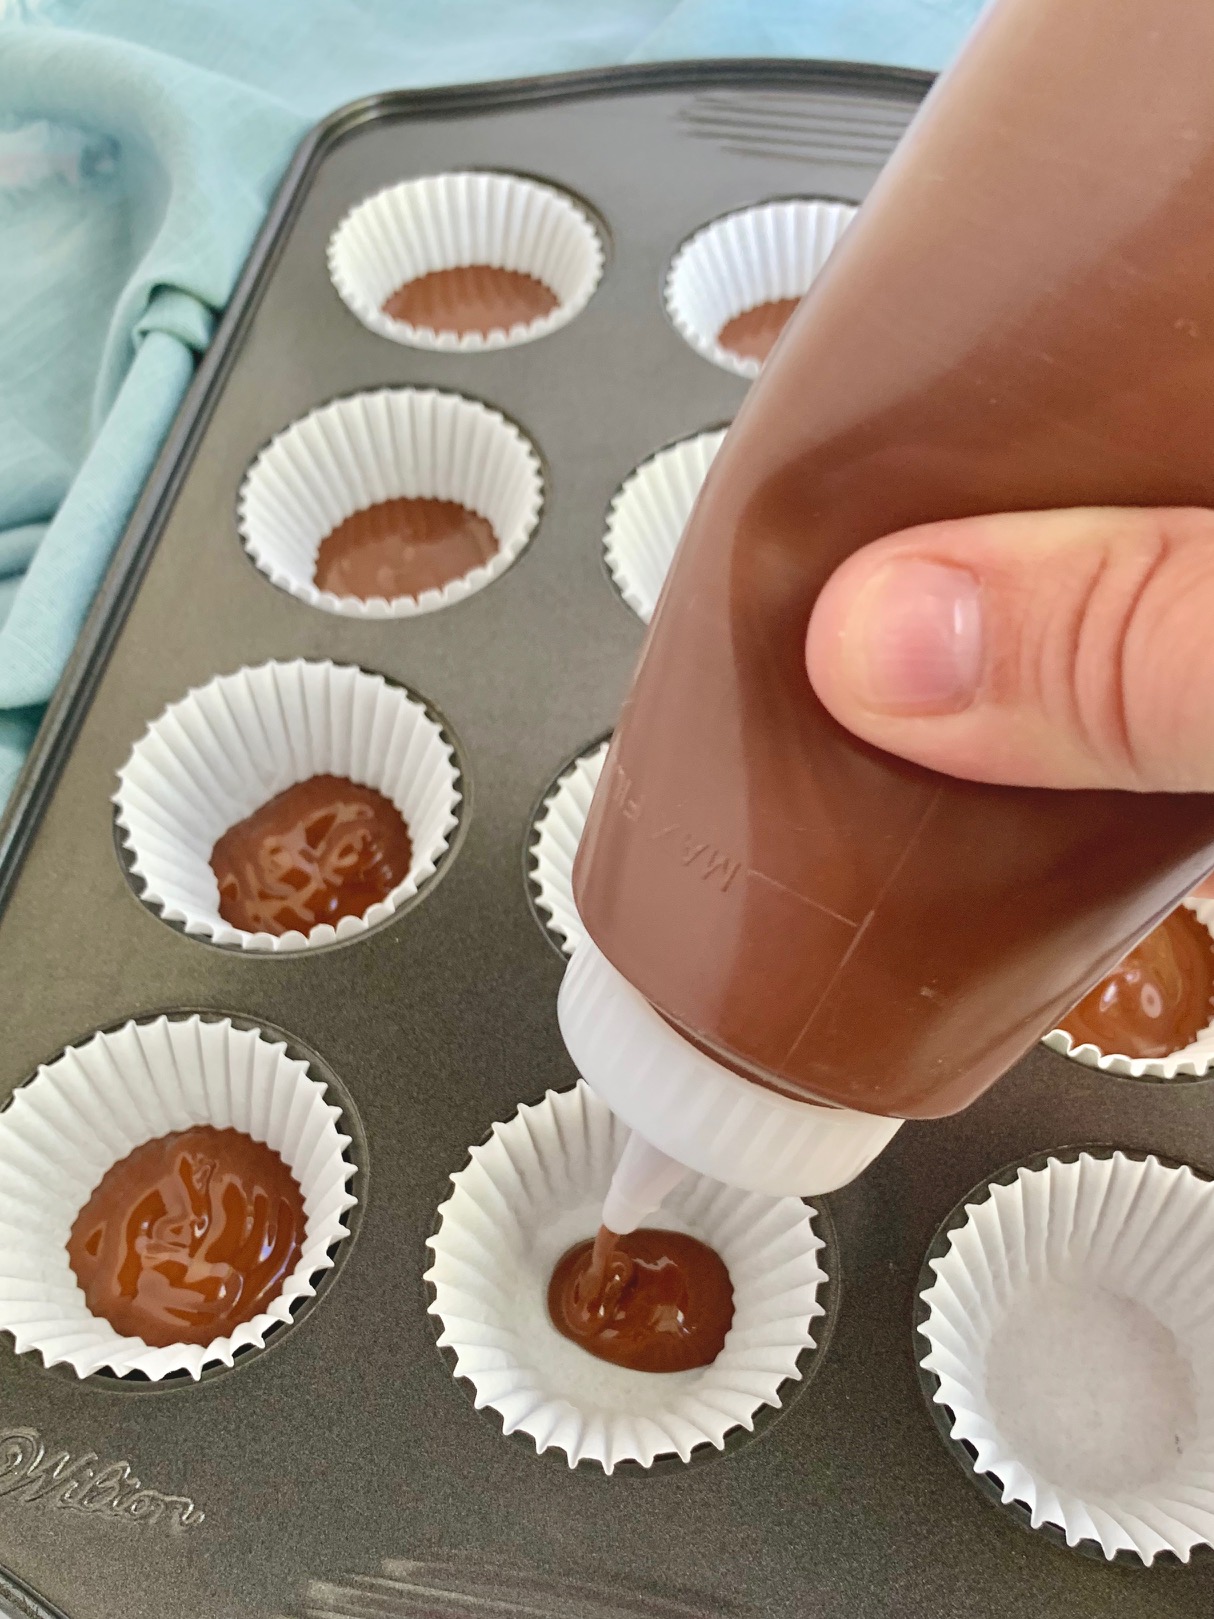 Filling a mini muffin pan with a layer of melted chocoalte